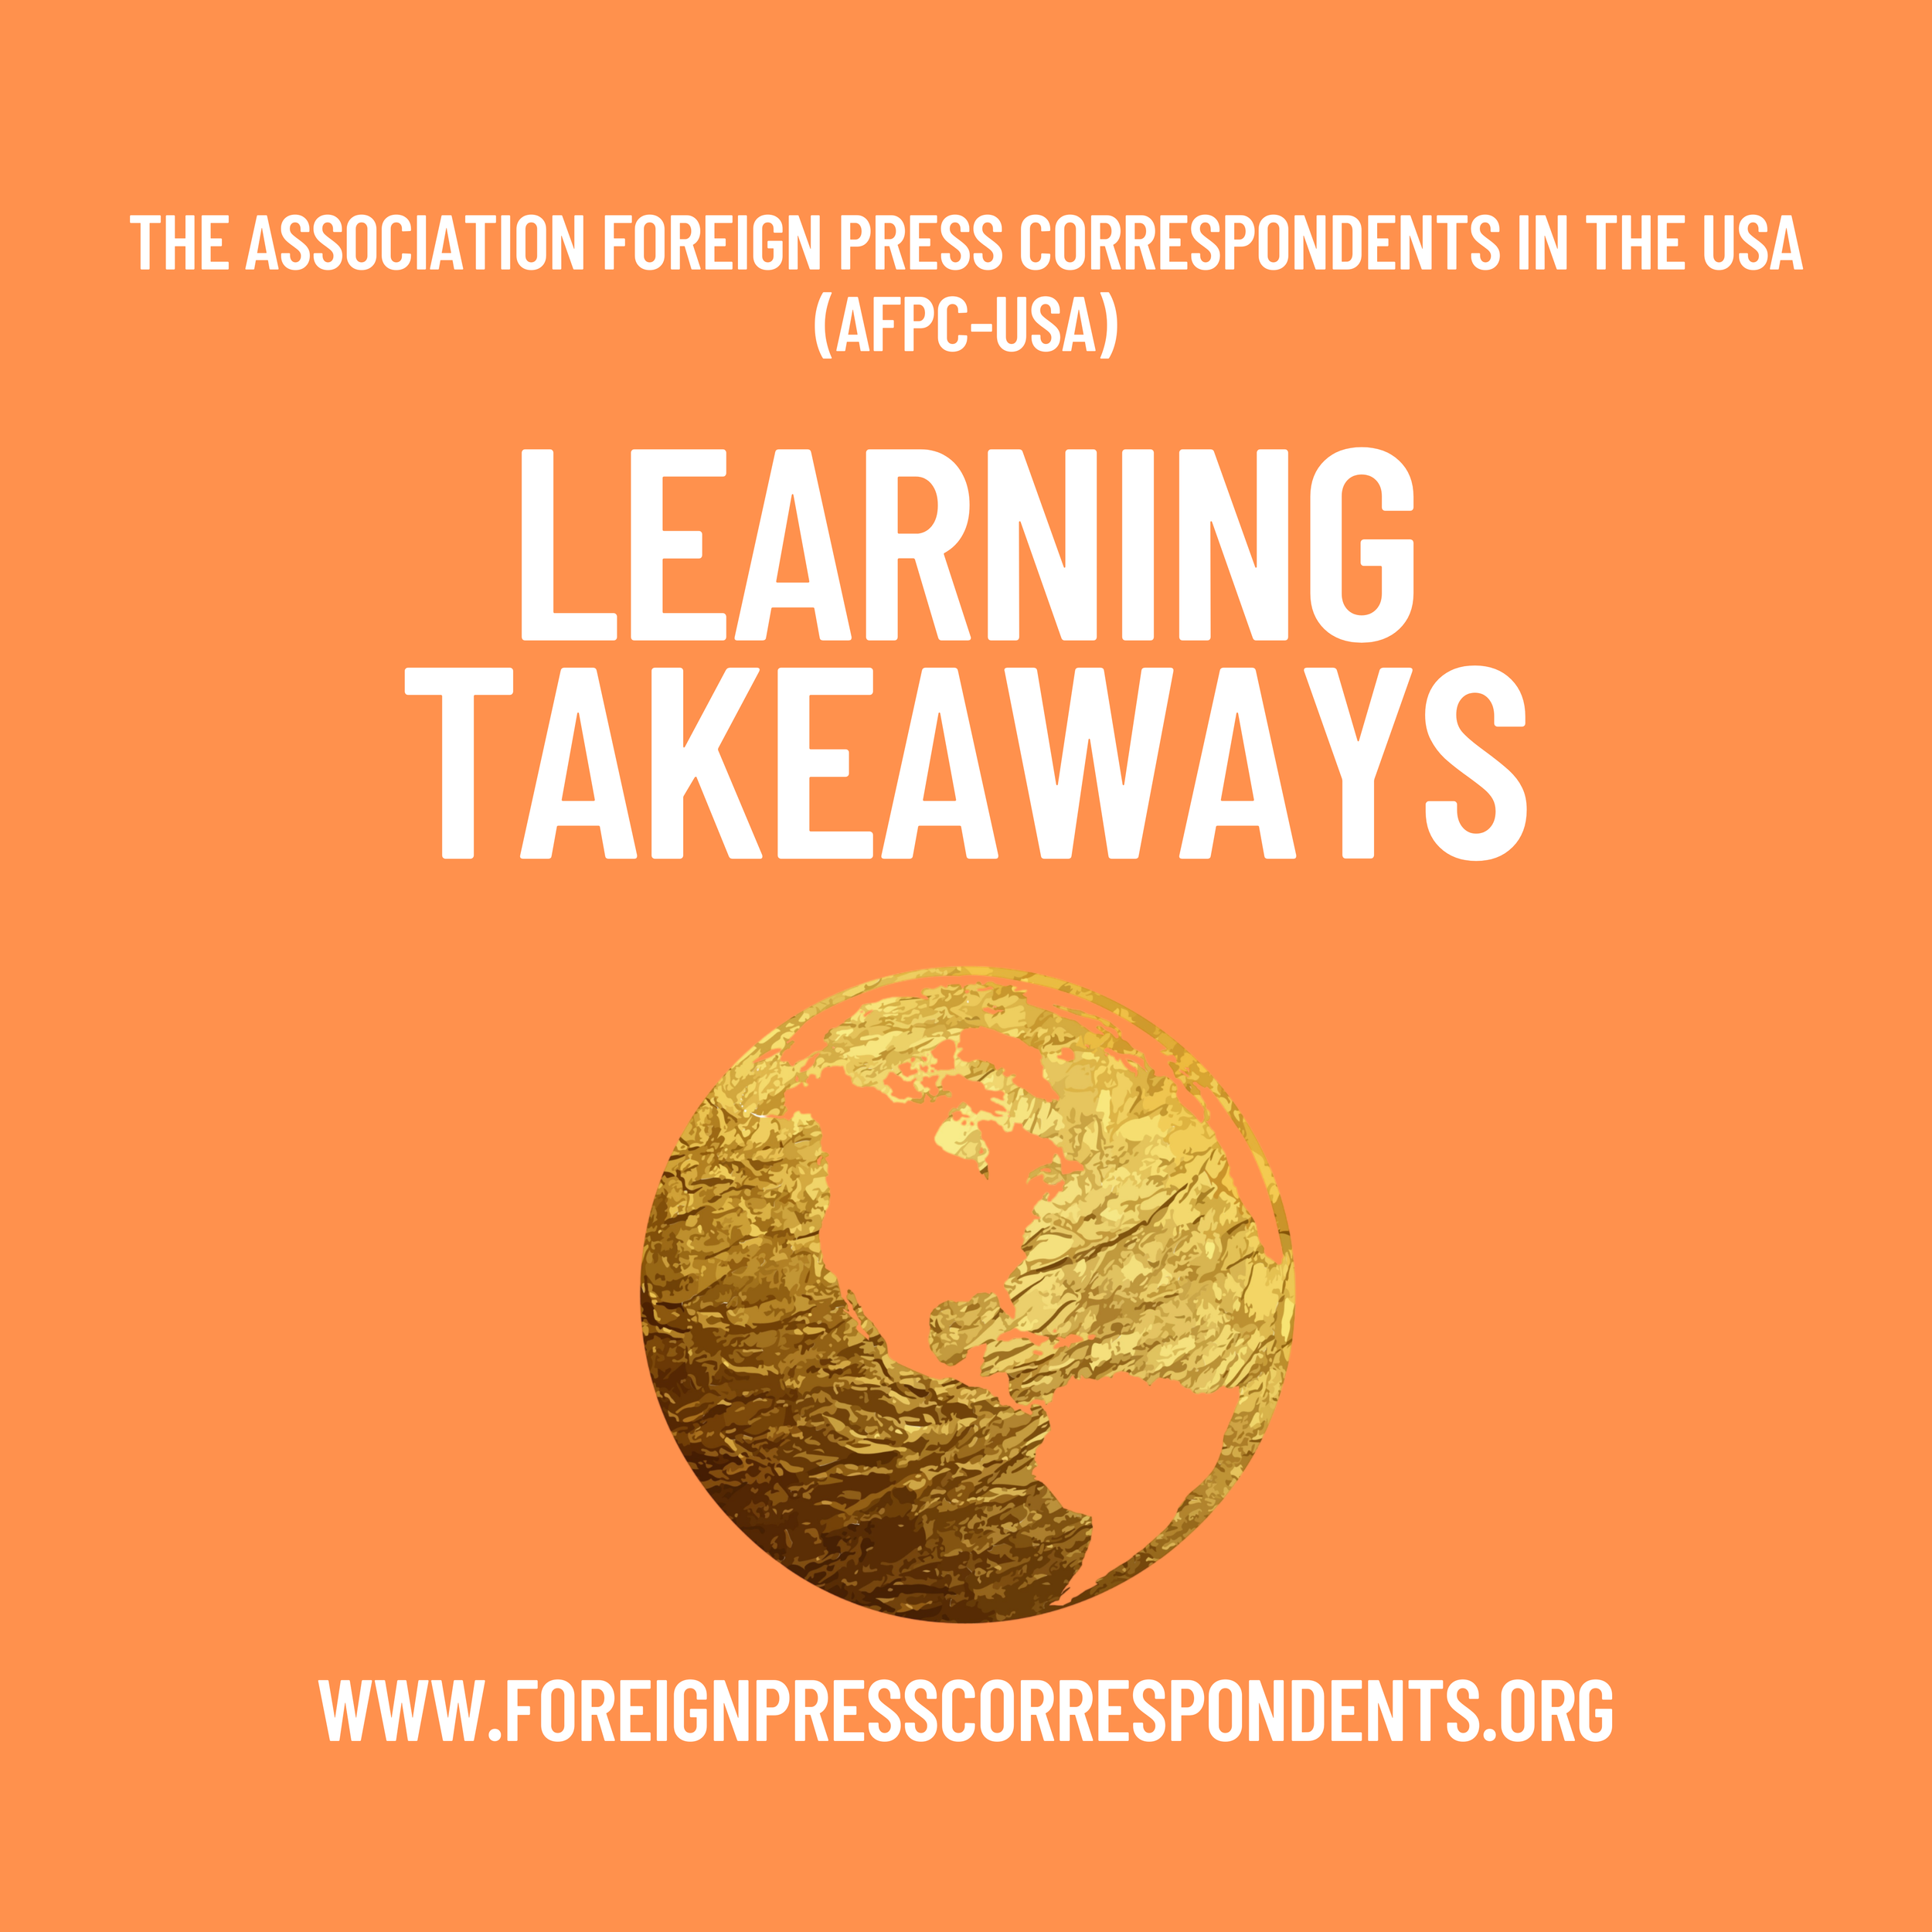 The Association and Club of Foreign Press Correspondents USA